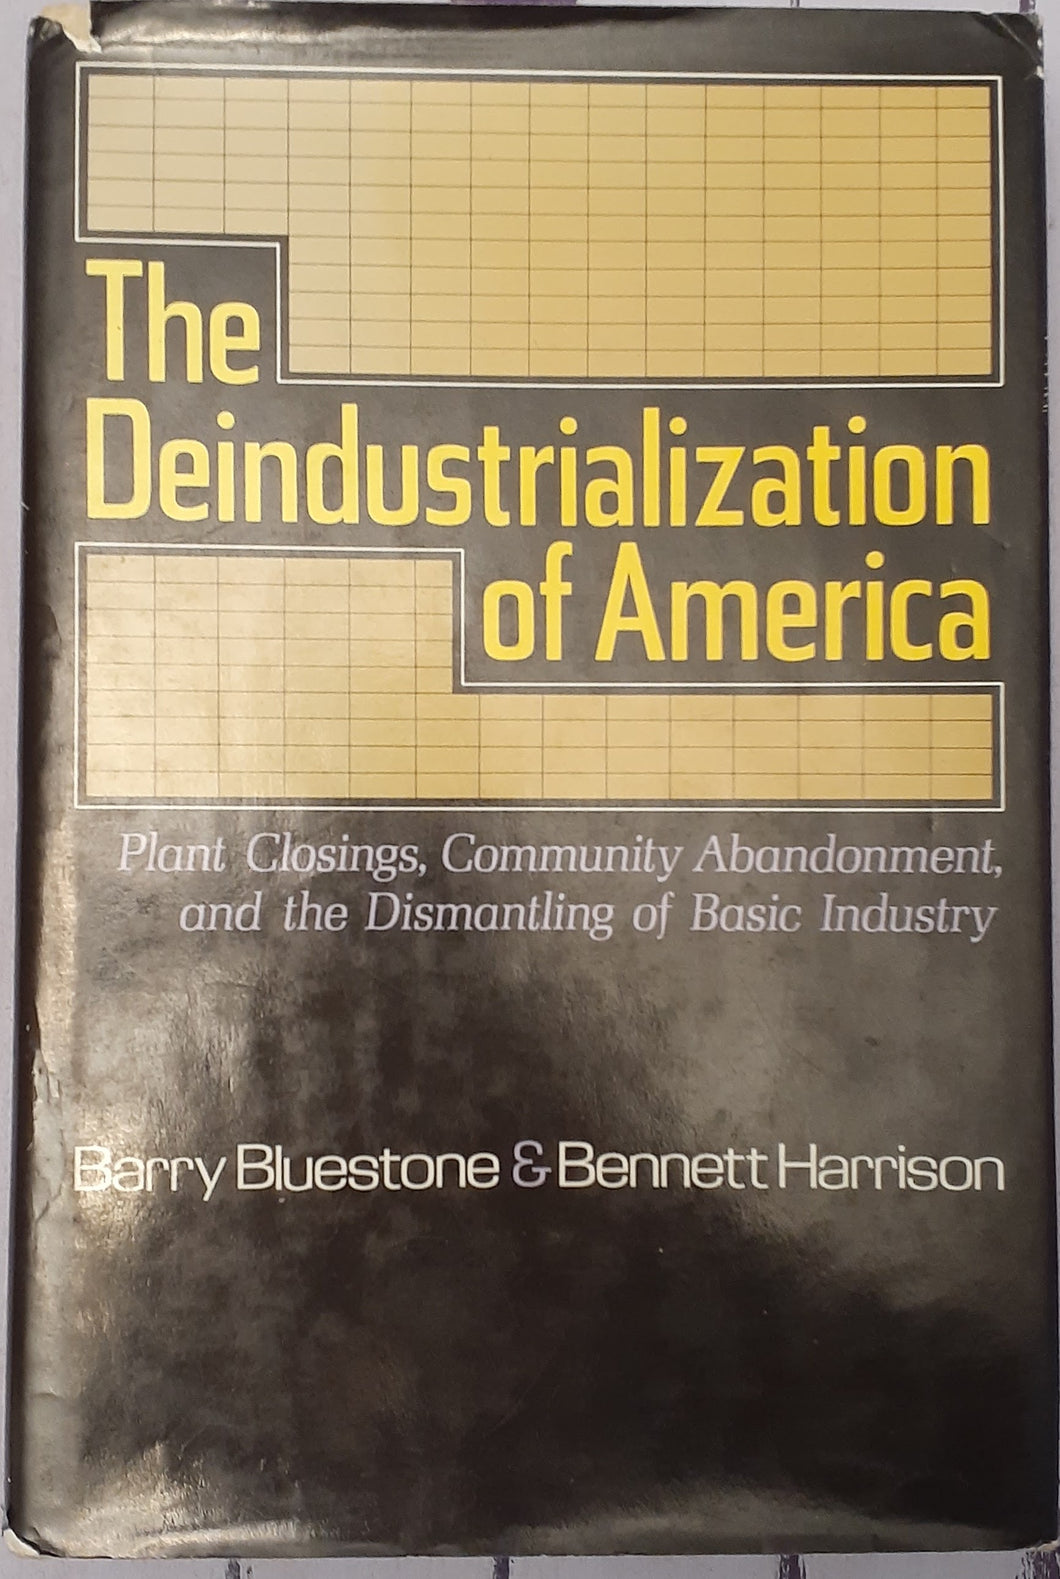 The Deindustrialization of America - Plant Closings, Community Abandonment, and the Dismantling of the Basic Industry